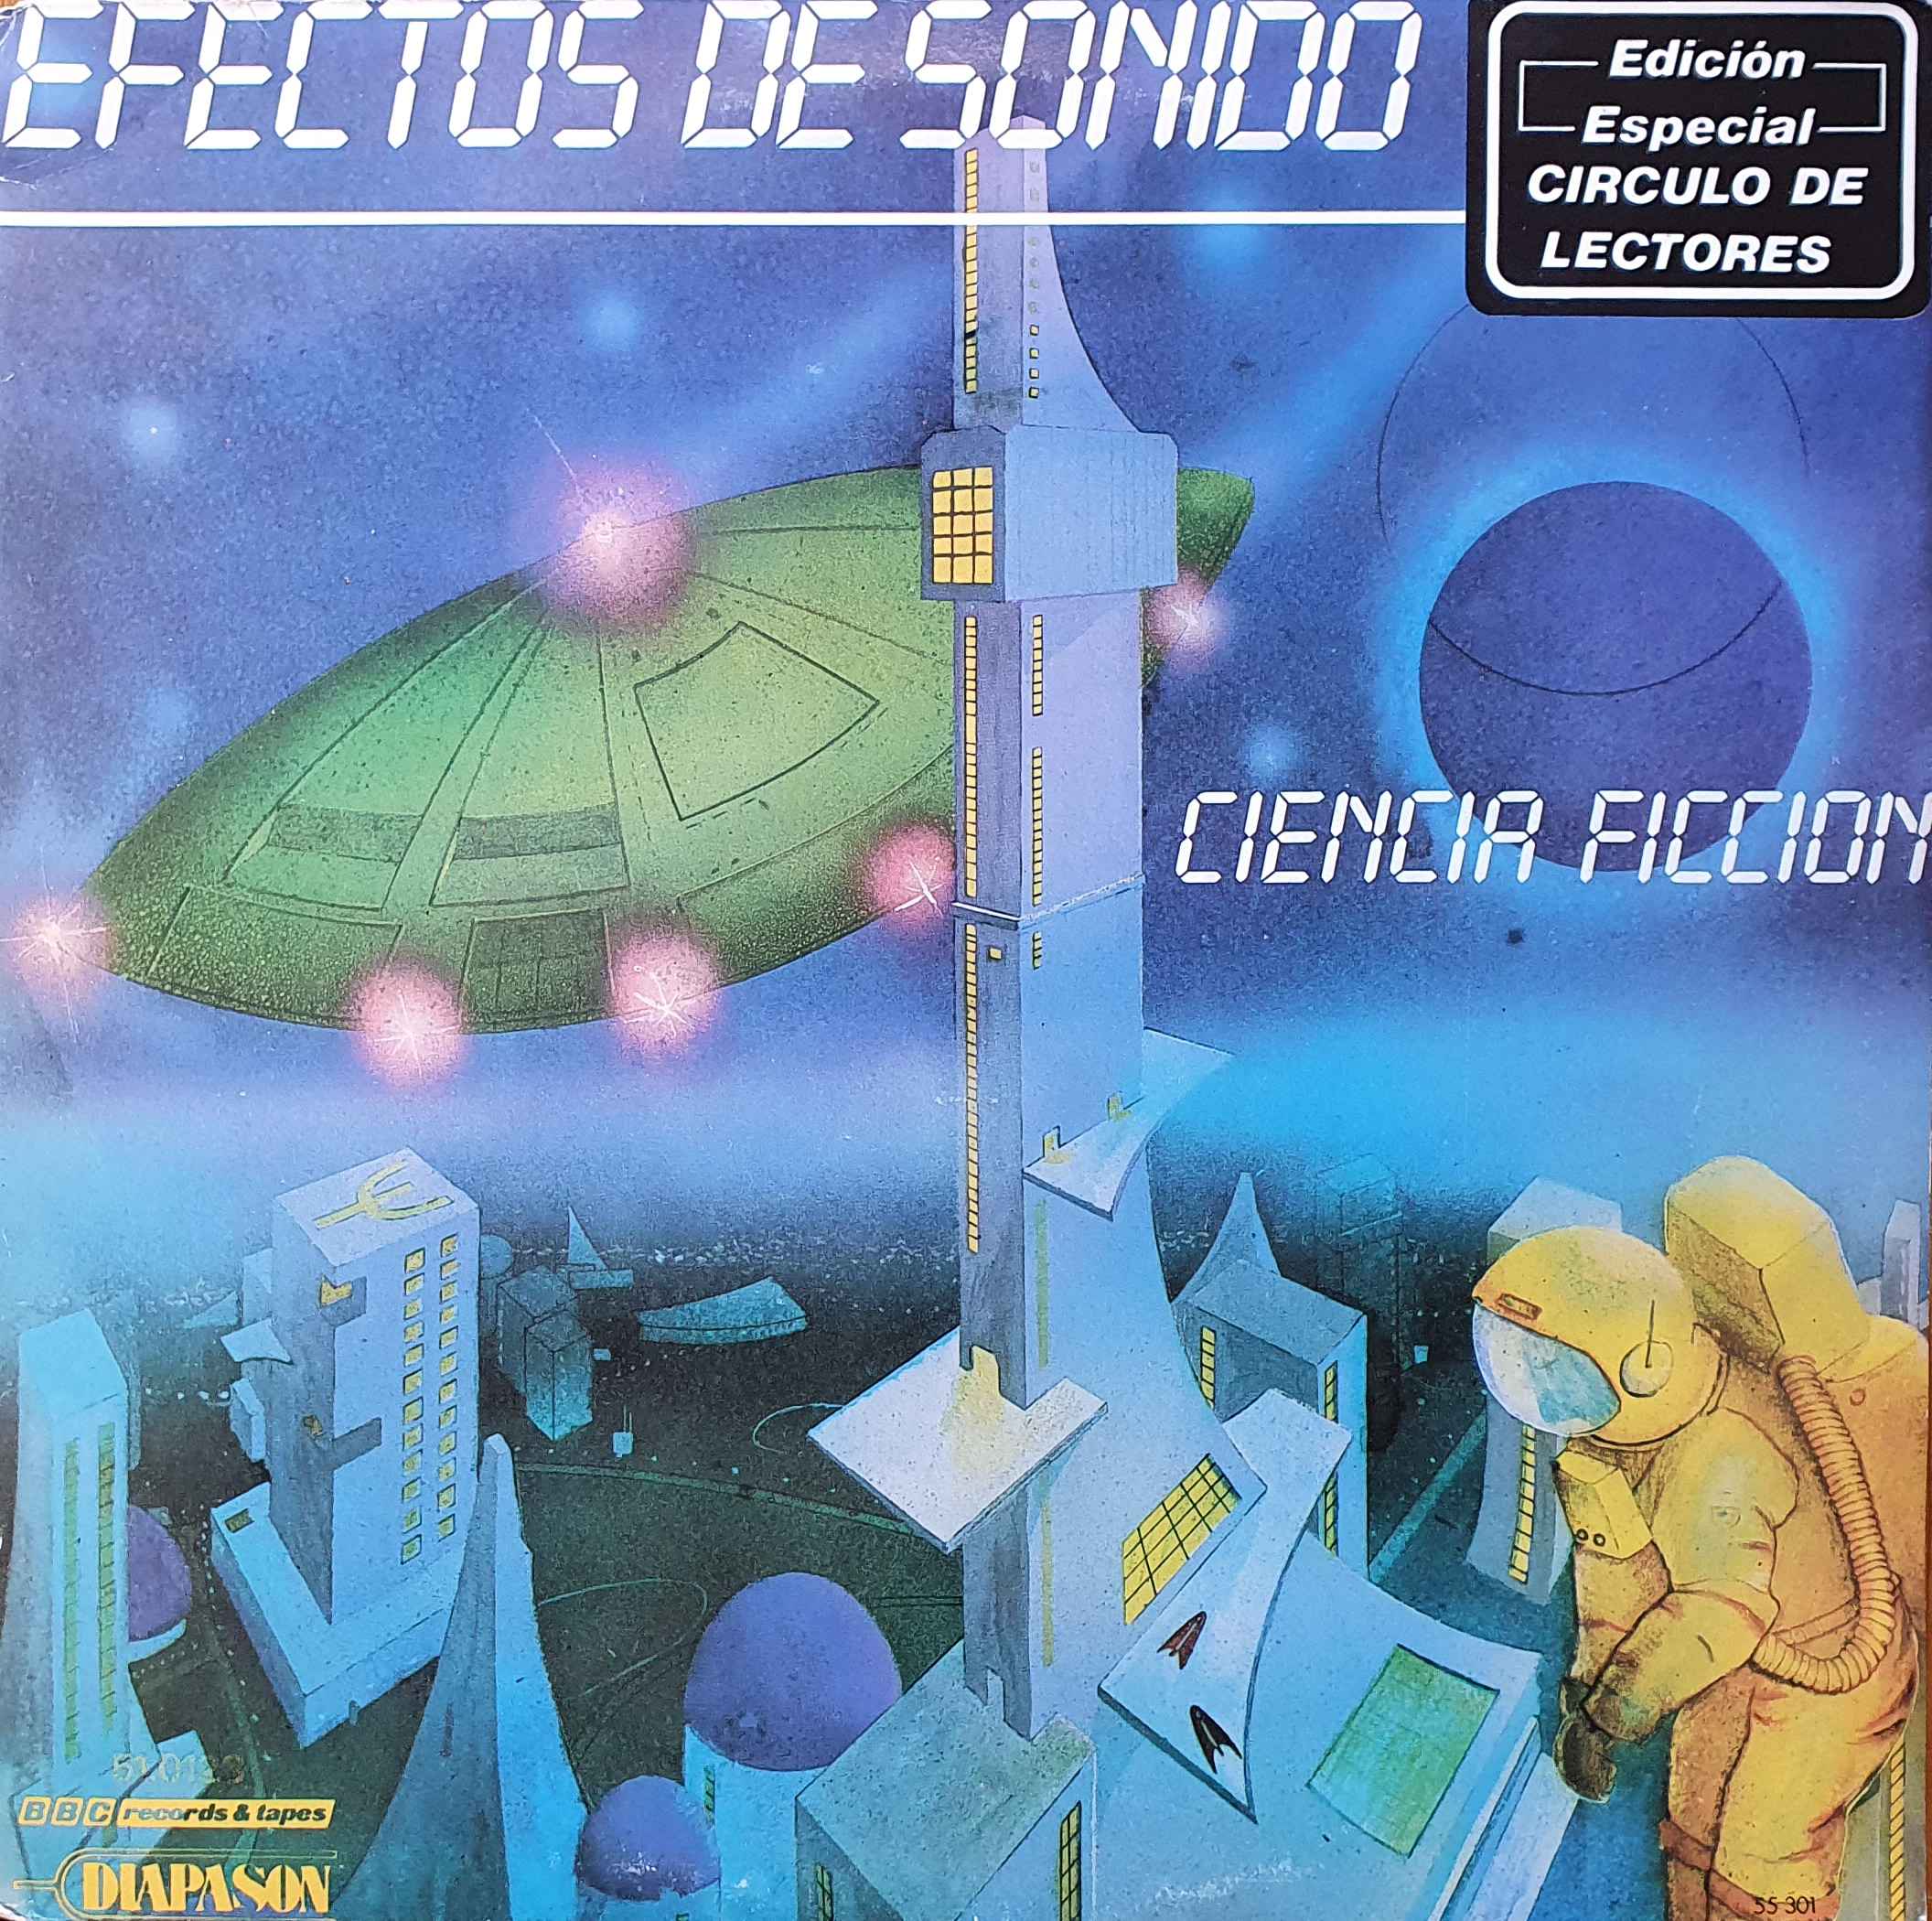 Picture of 55.301 Efectos De Sonido Ciencia Ficcion by artist Various from the BBC albums - Records and Tapes library